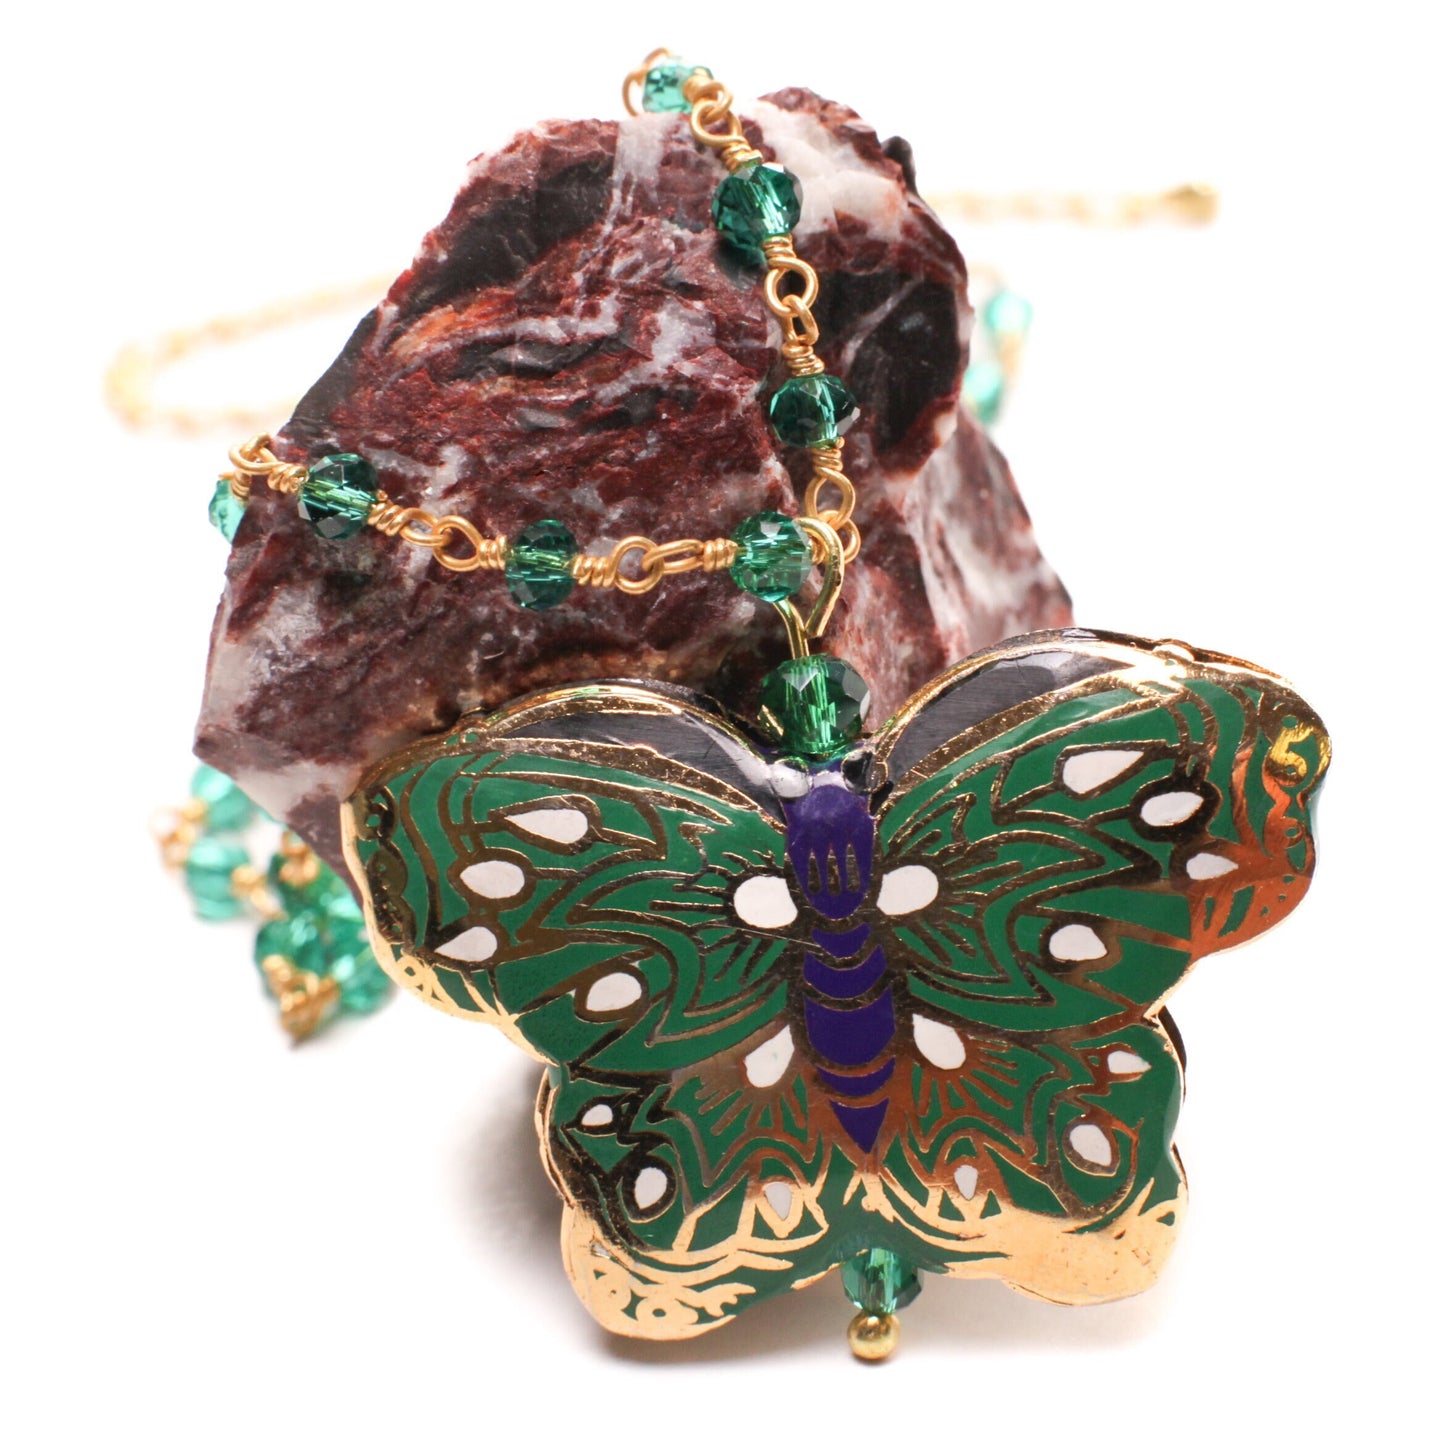 Traditional Cloisonné Double Sided Vintage Butterfly pendant with matching Green Onyx Necklace 18”plus 3"Extension. Beautiful Butterfly gift